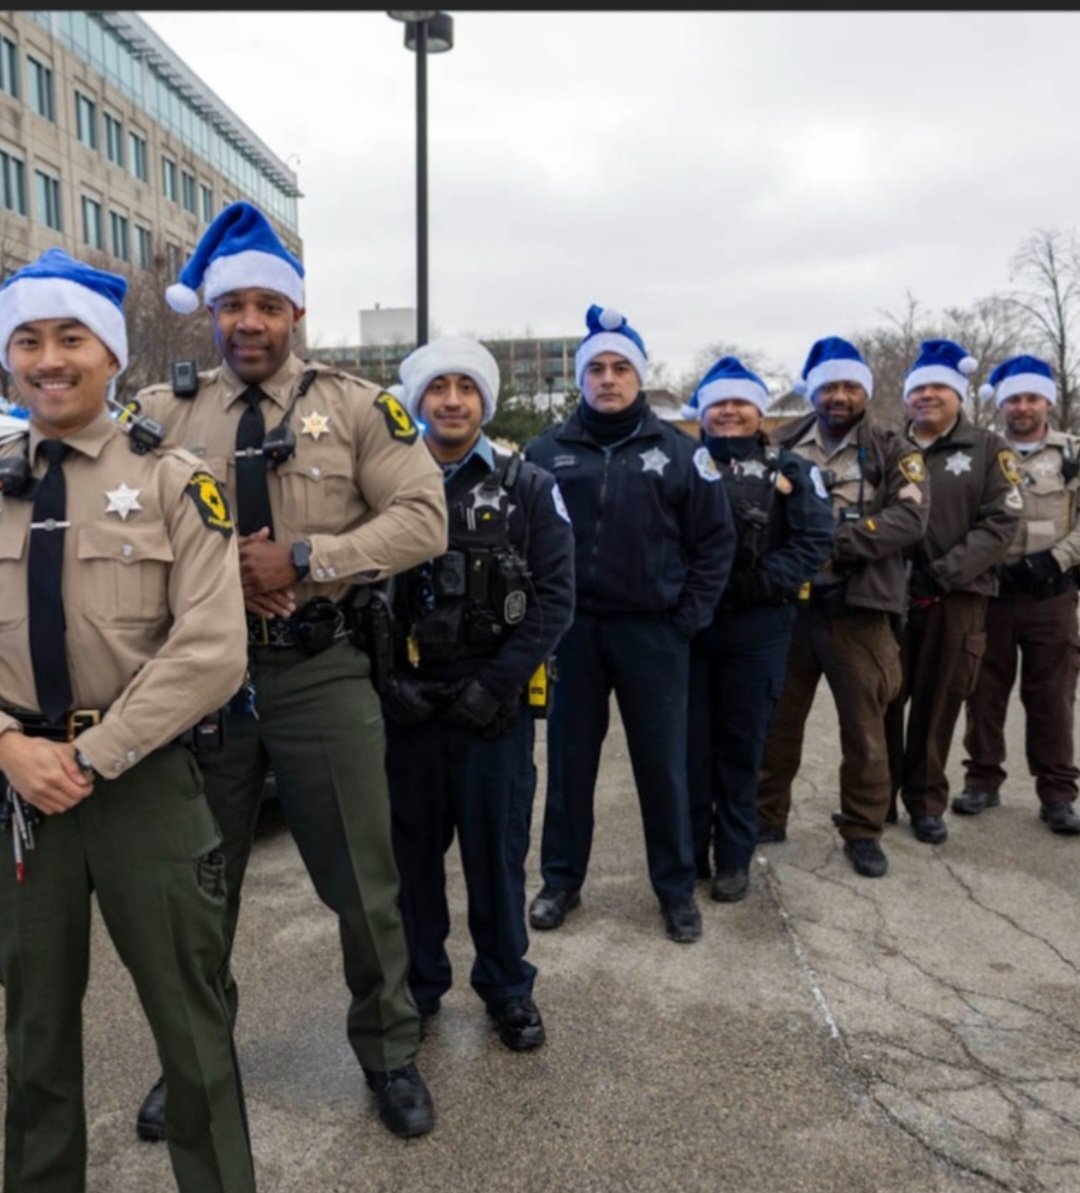 The Blue Police are cruising through the Chicago area, putting Blue Santa's Nice list together for the ChicagoLand TOY Giveaway. There is still time to switch from the Naughty list to the Nice list Happy Holidays! @Chicago_Police @ILStatePolice @CookSheriffIL @TheChiGivesBack